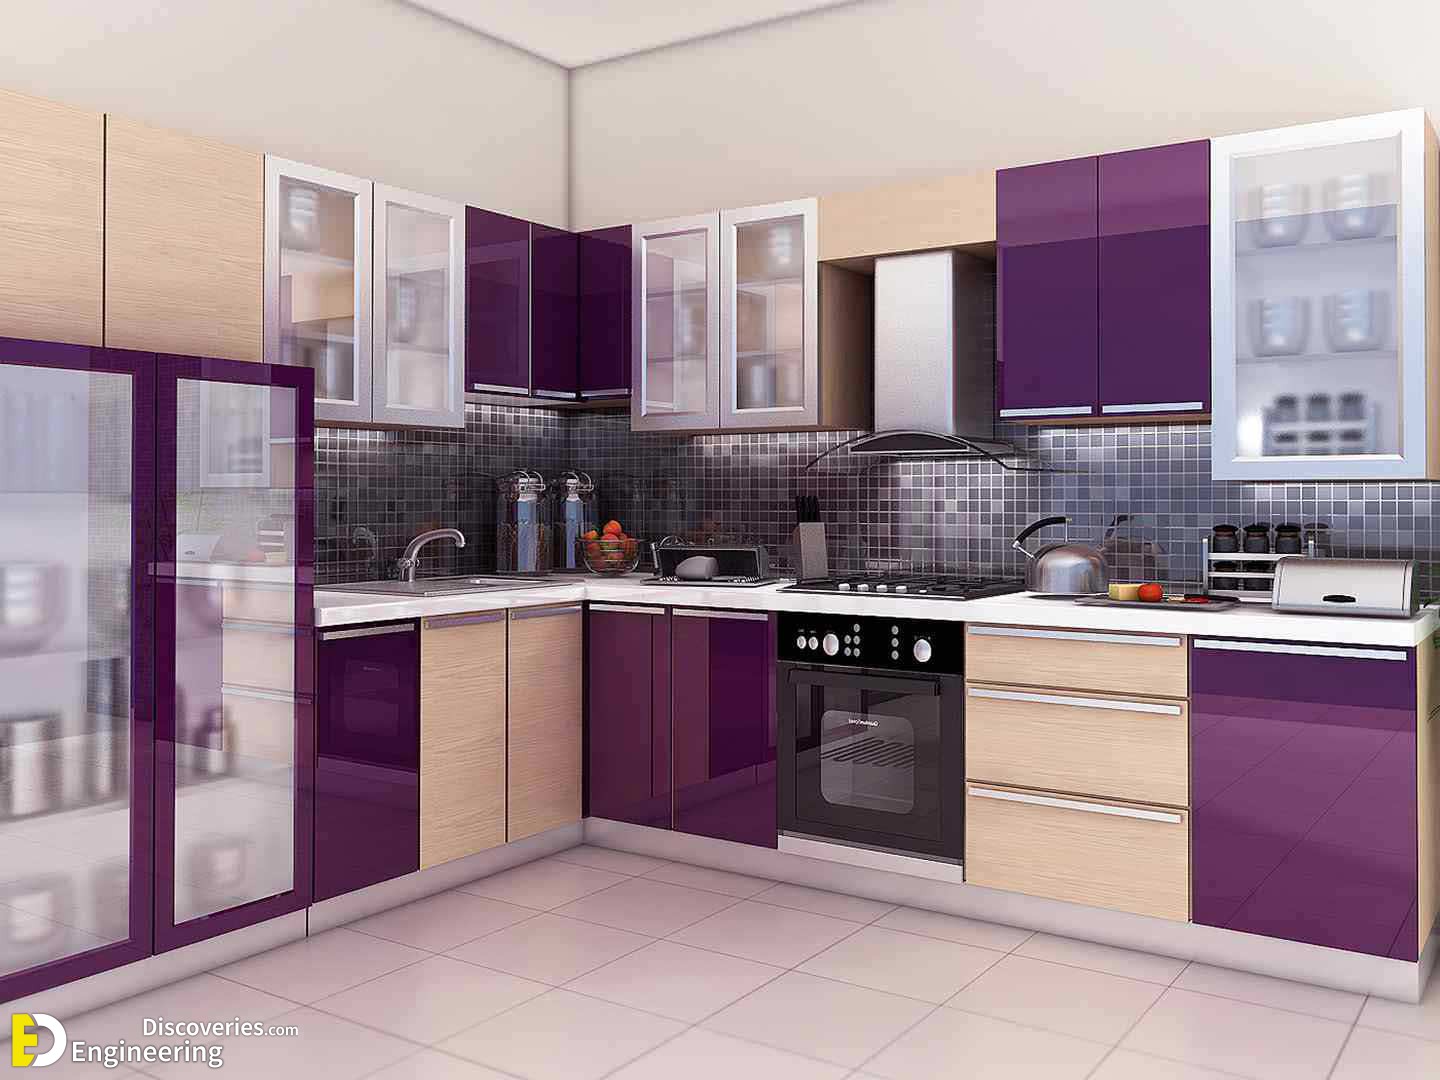 Top 25 Modern Kitchen Design Ideas For 25   Engineering Discoveries